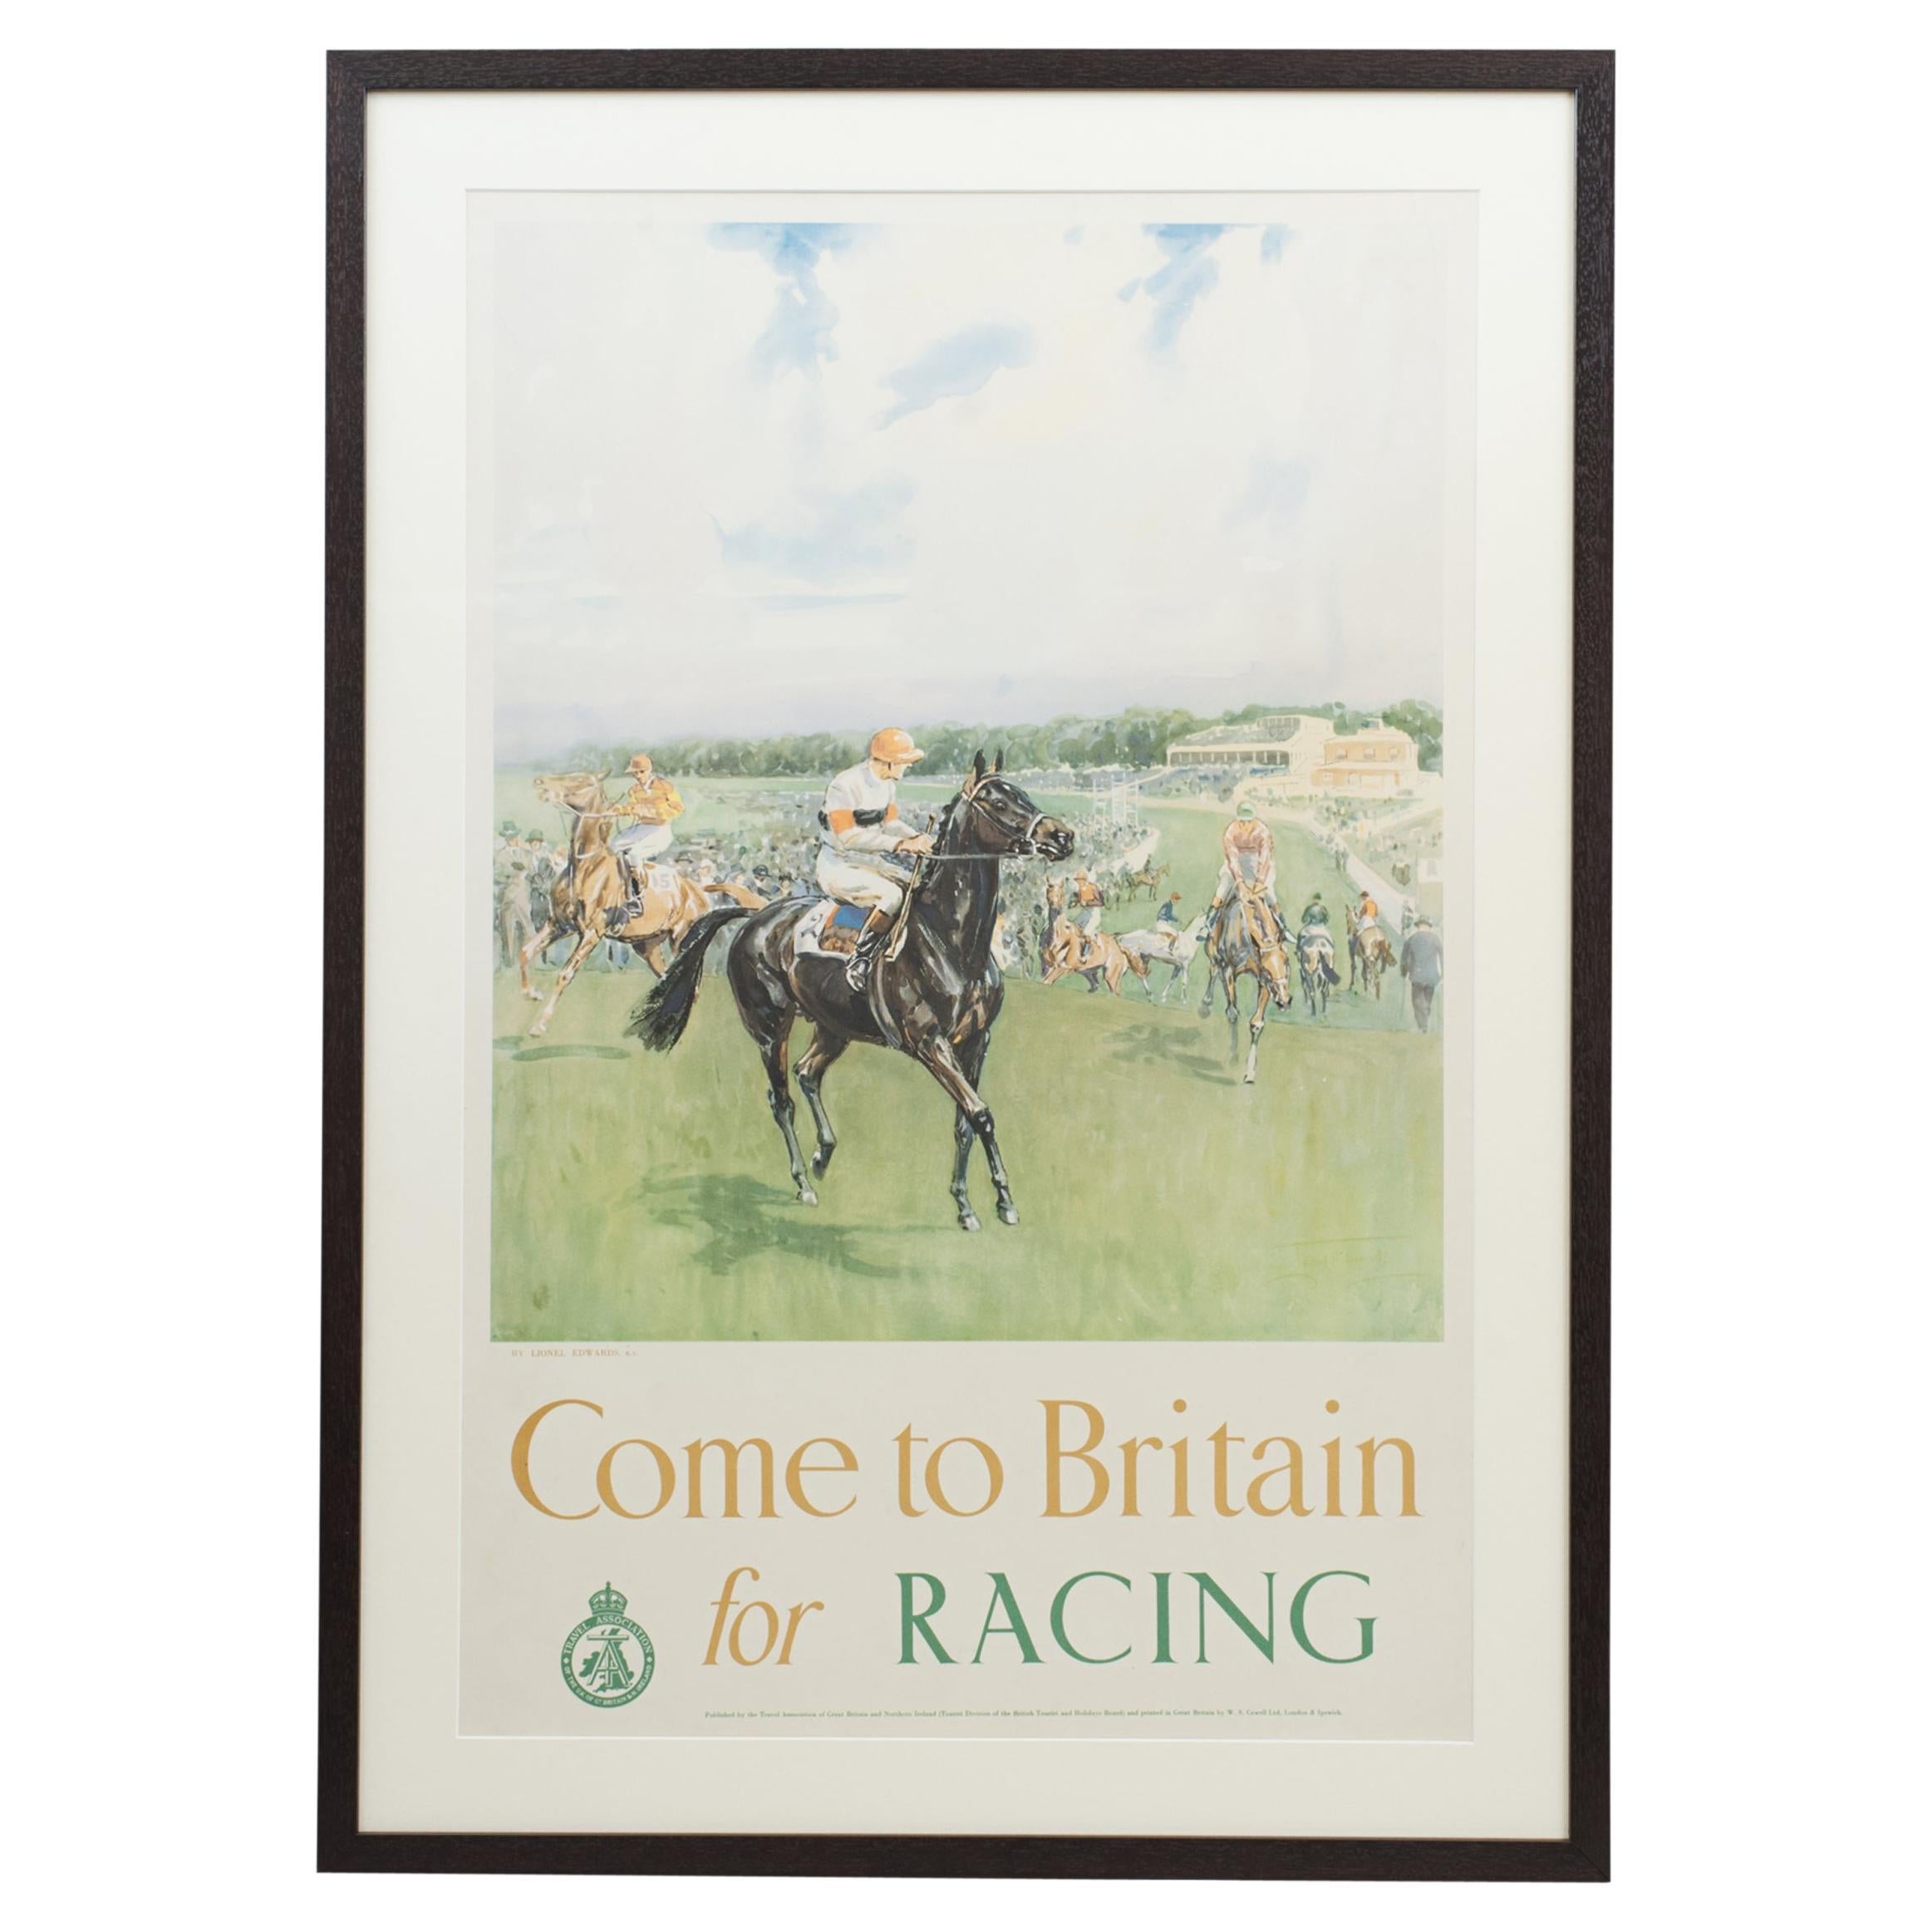 Travel Poster by Lionel Edwards, Come to Britain for Racing Poster